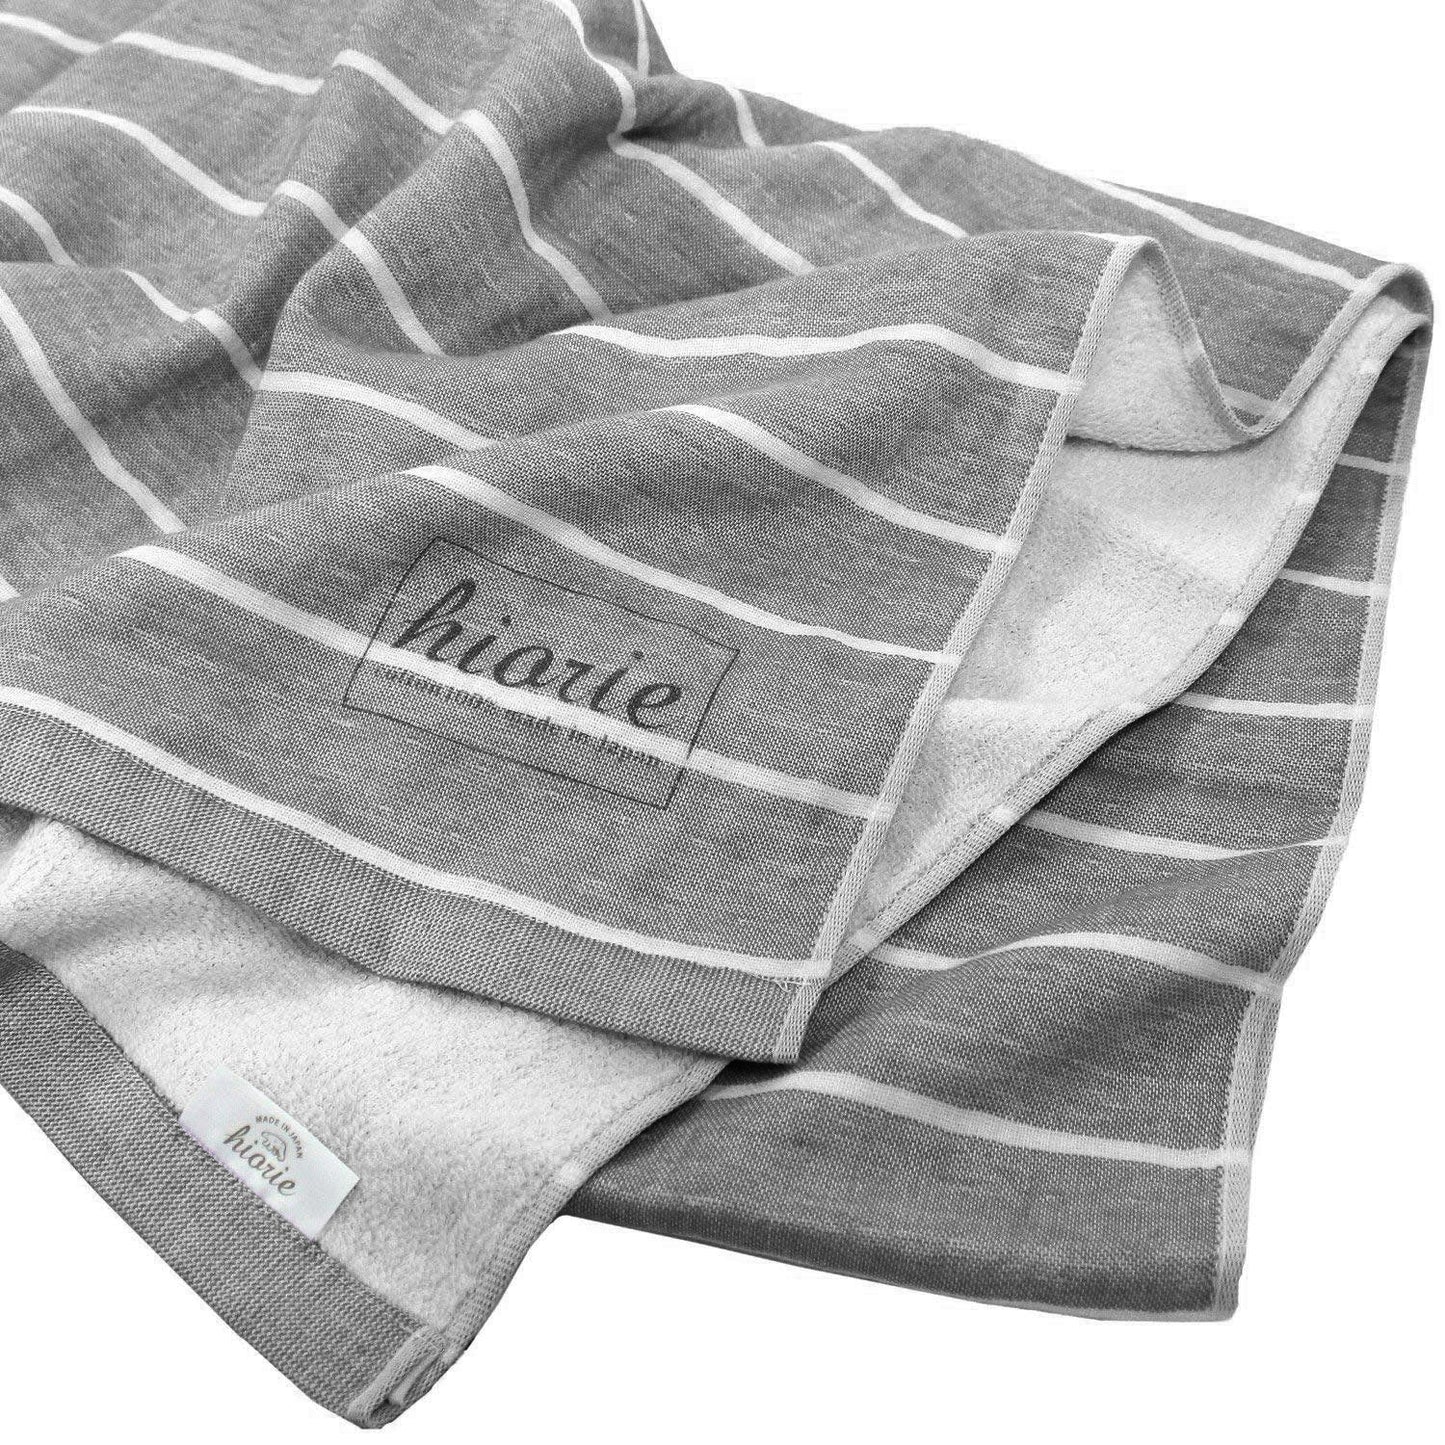 [Limited edition]Special Deal Hiorie Gauze WaterAbsorption Large Bath Towel